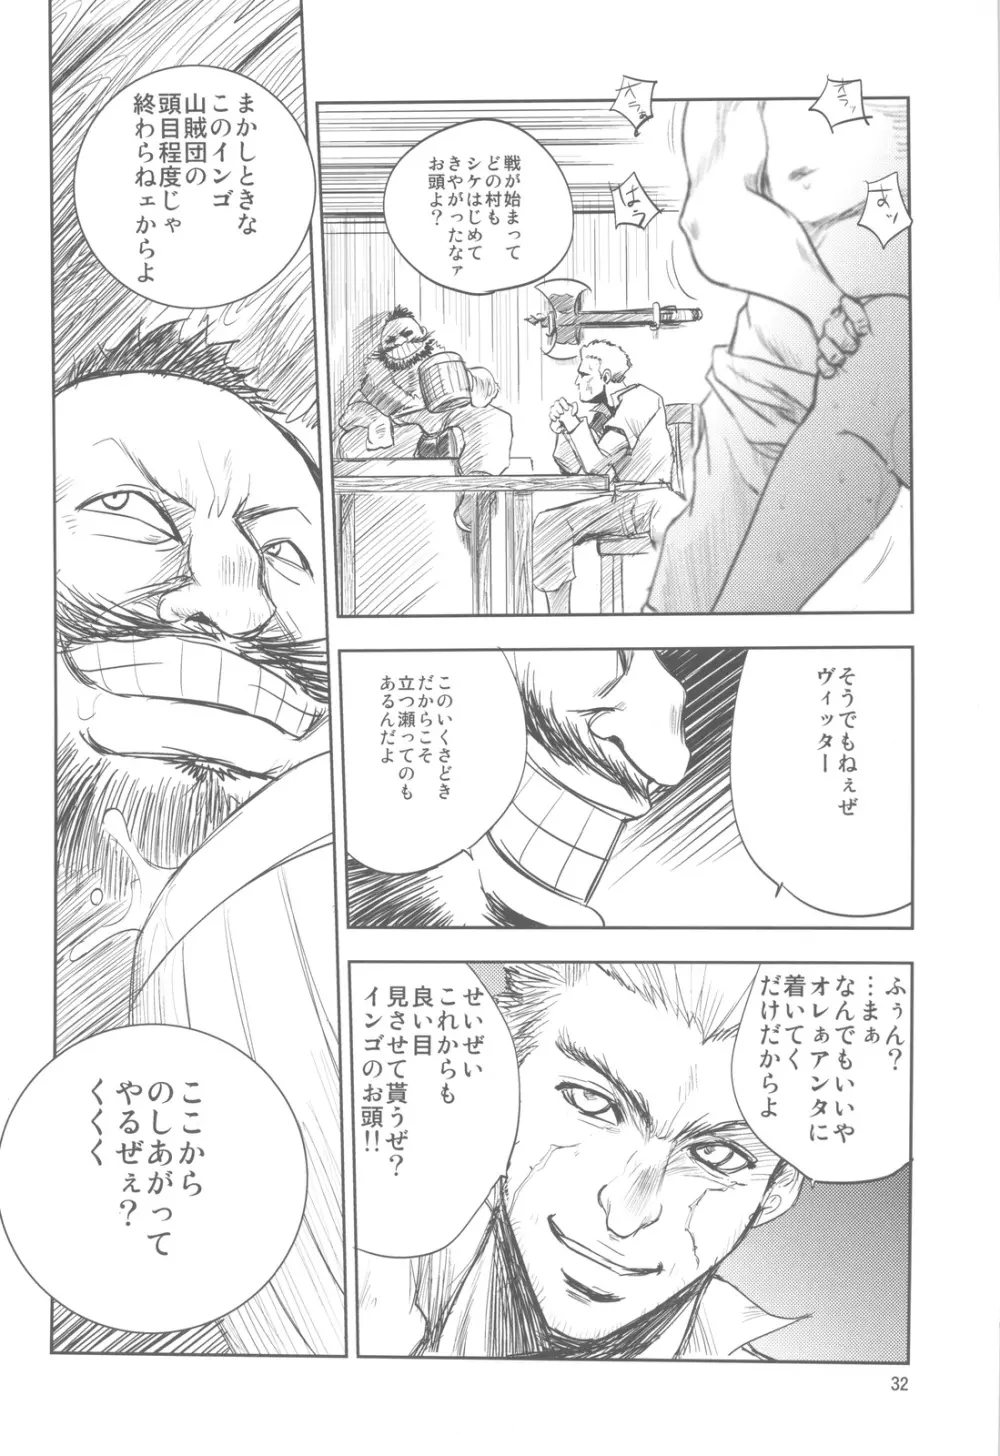 GRASSEN'S WAR ANOTHER STORY Ex #01 ノード侵攻 I - page31